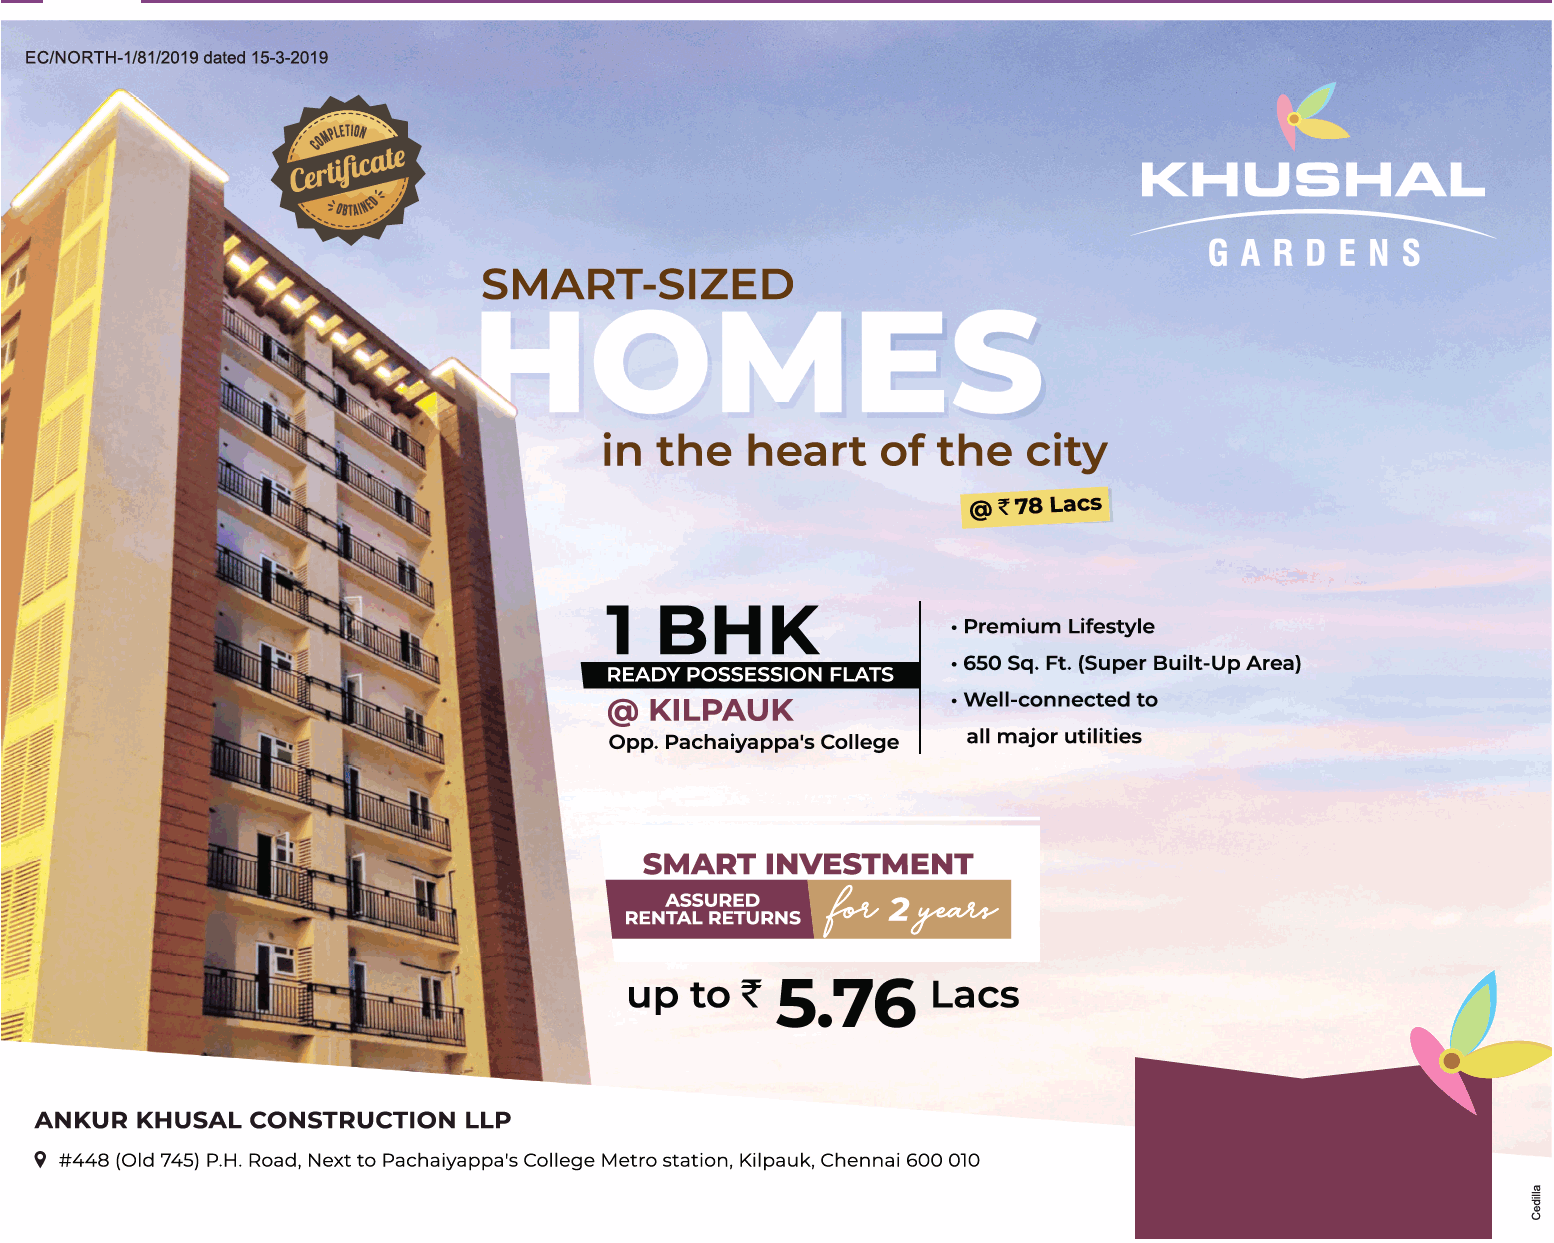 Smart investment assured rental returns up to Rs 5.76 Lac at Ankur Khushal Gardens, Chennai